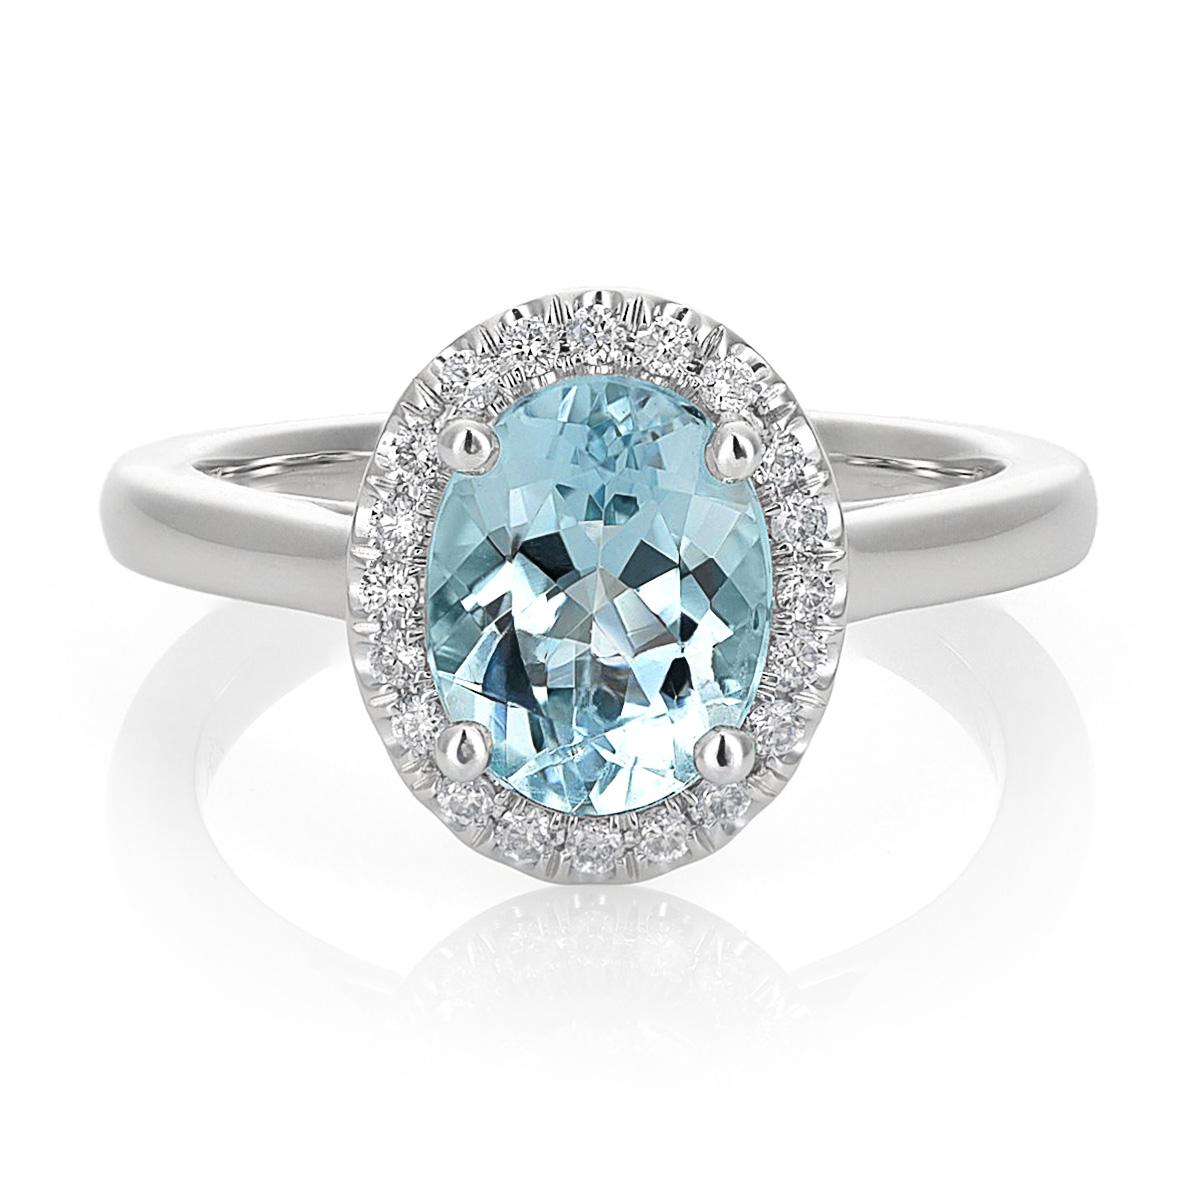 1.13 Carats Natural Aquamarine Diamonds set in 14K White Gold In New Condition For Sale In Los Angeles, CA